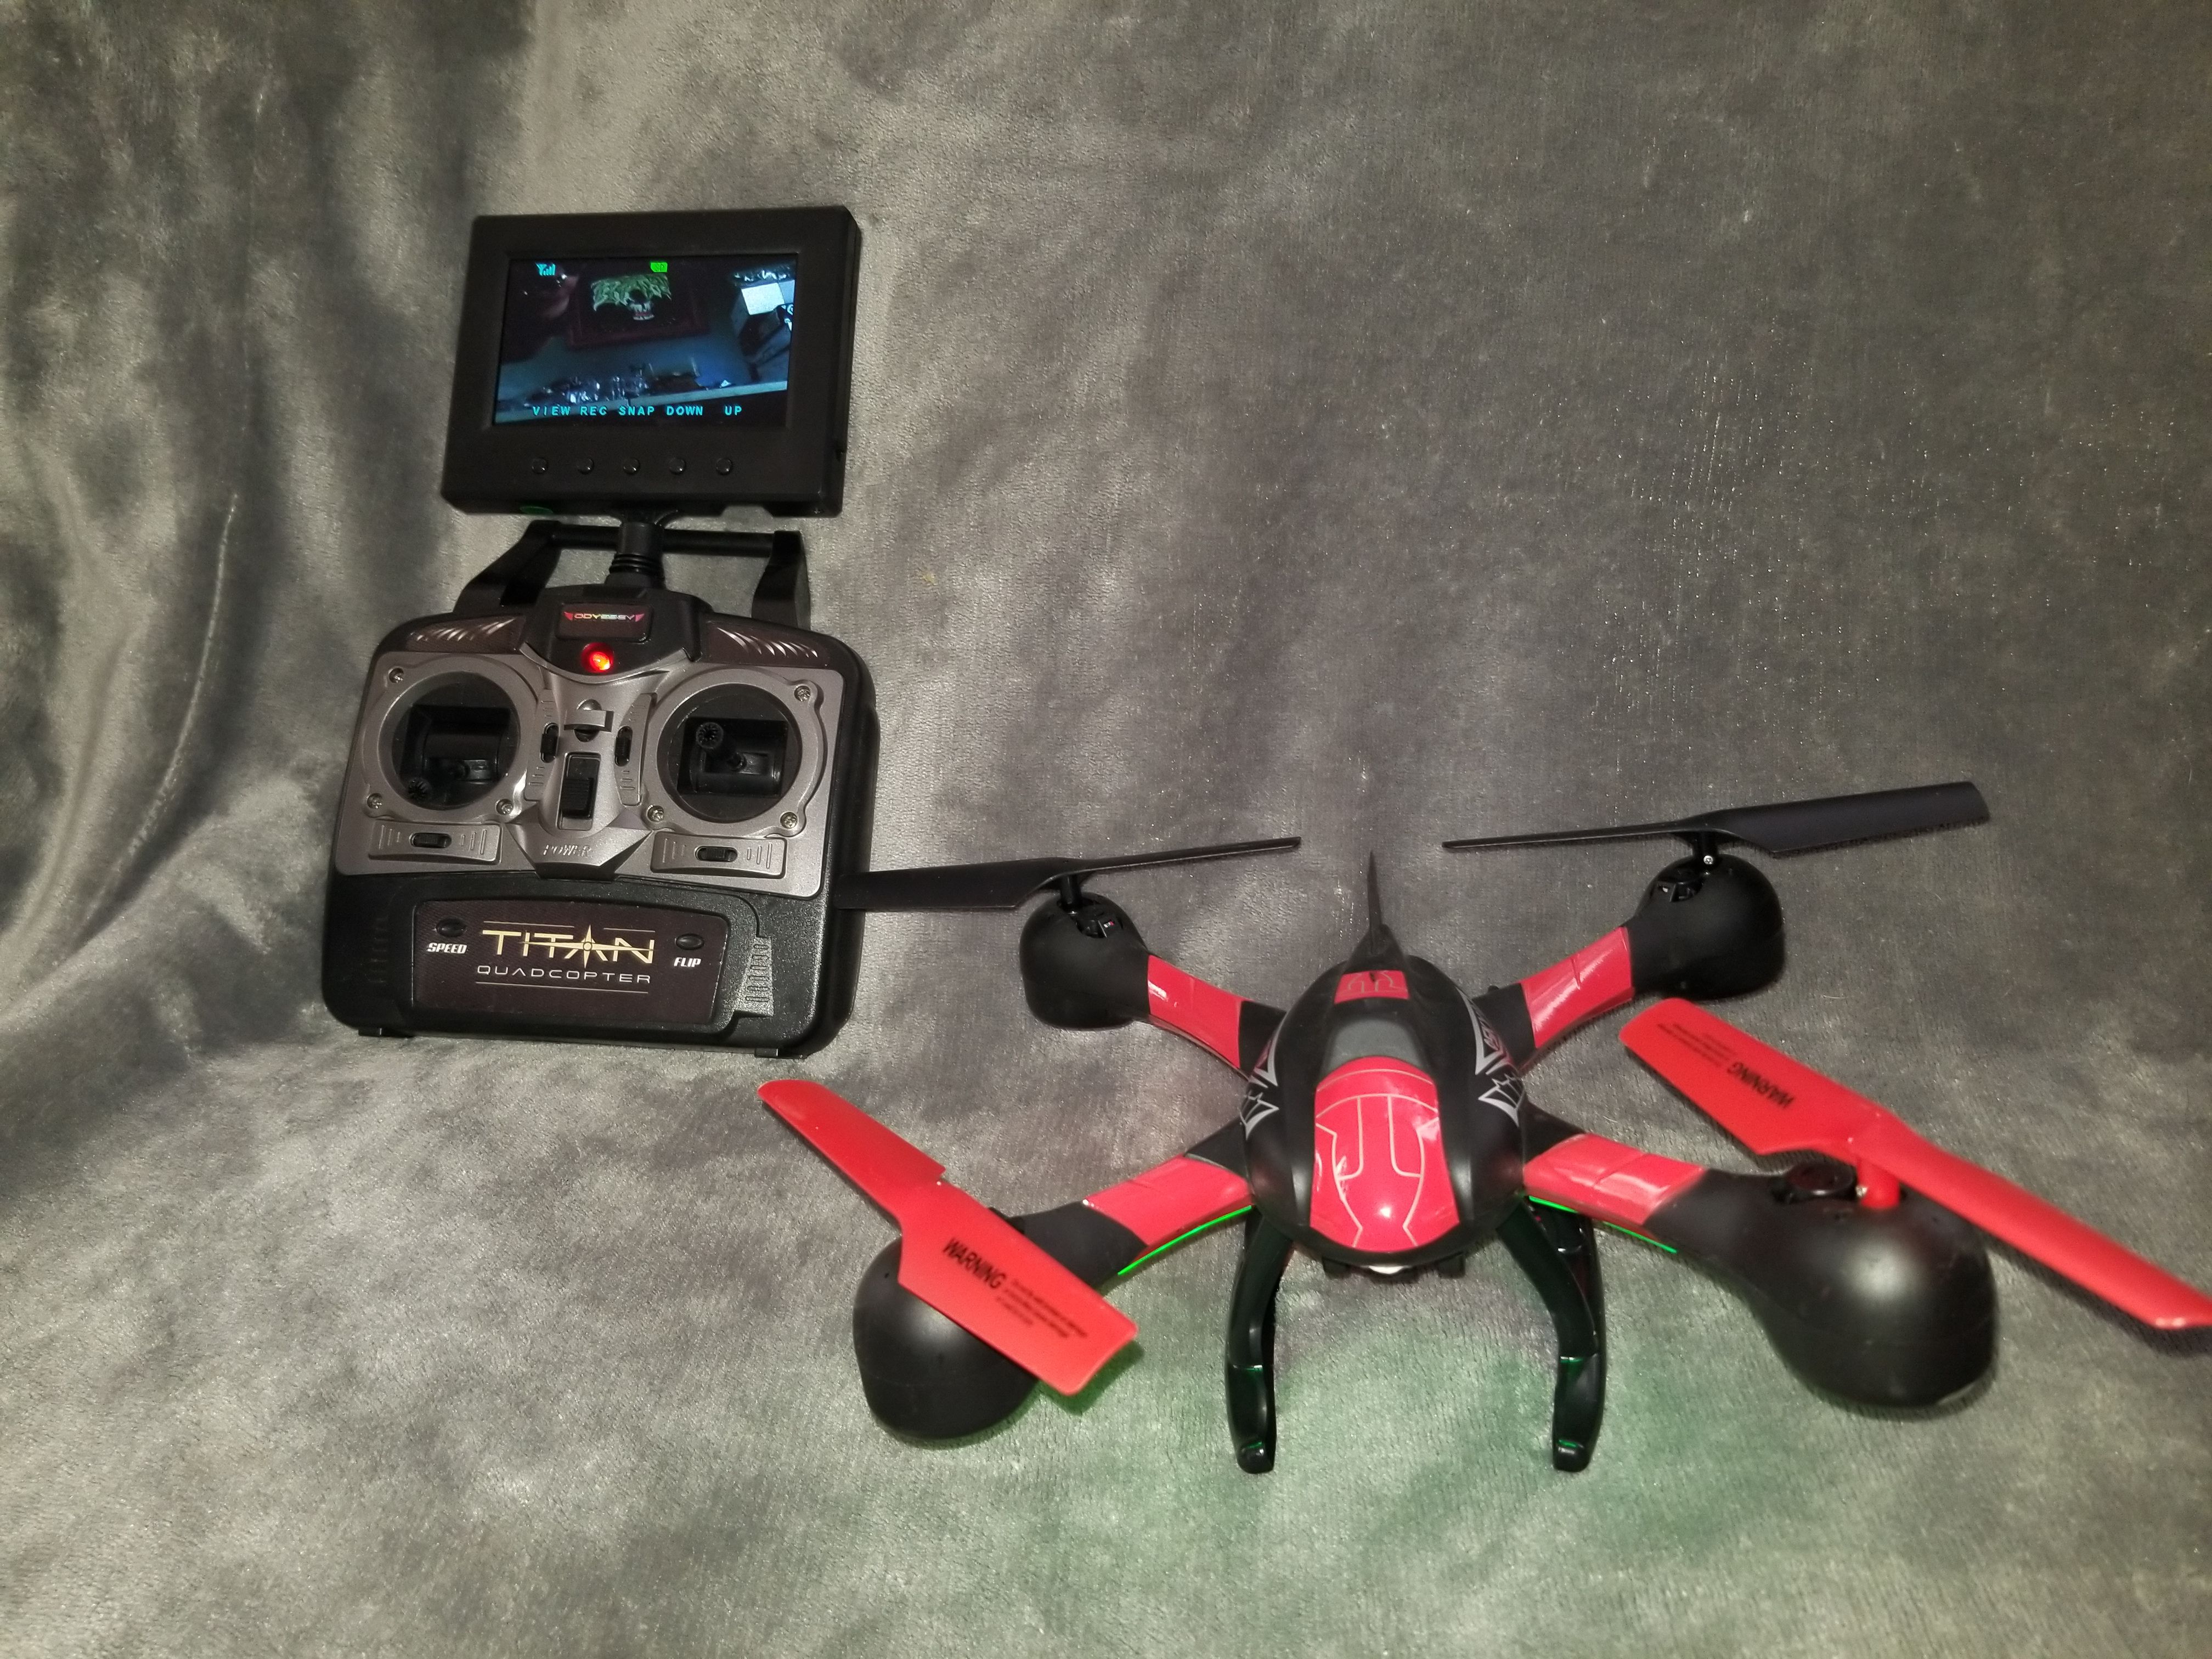 TODAY ONLY $50...Odyssey ODY-2283-FPV 5.8 Ghz Transmitter Quadcopter Drone with Detachable Screen